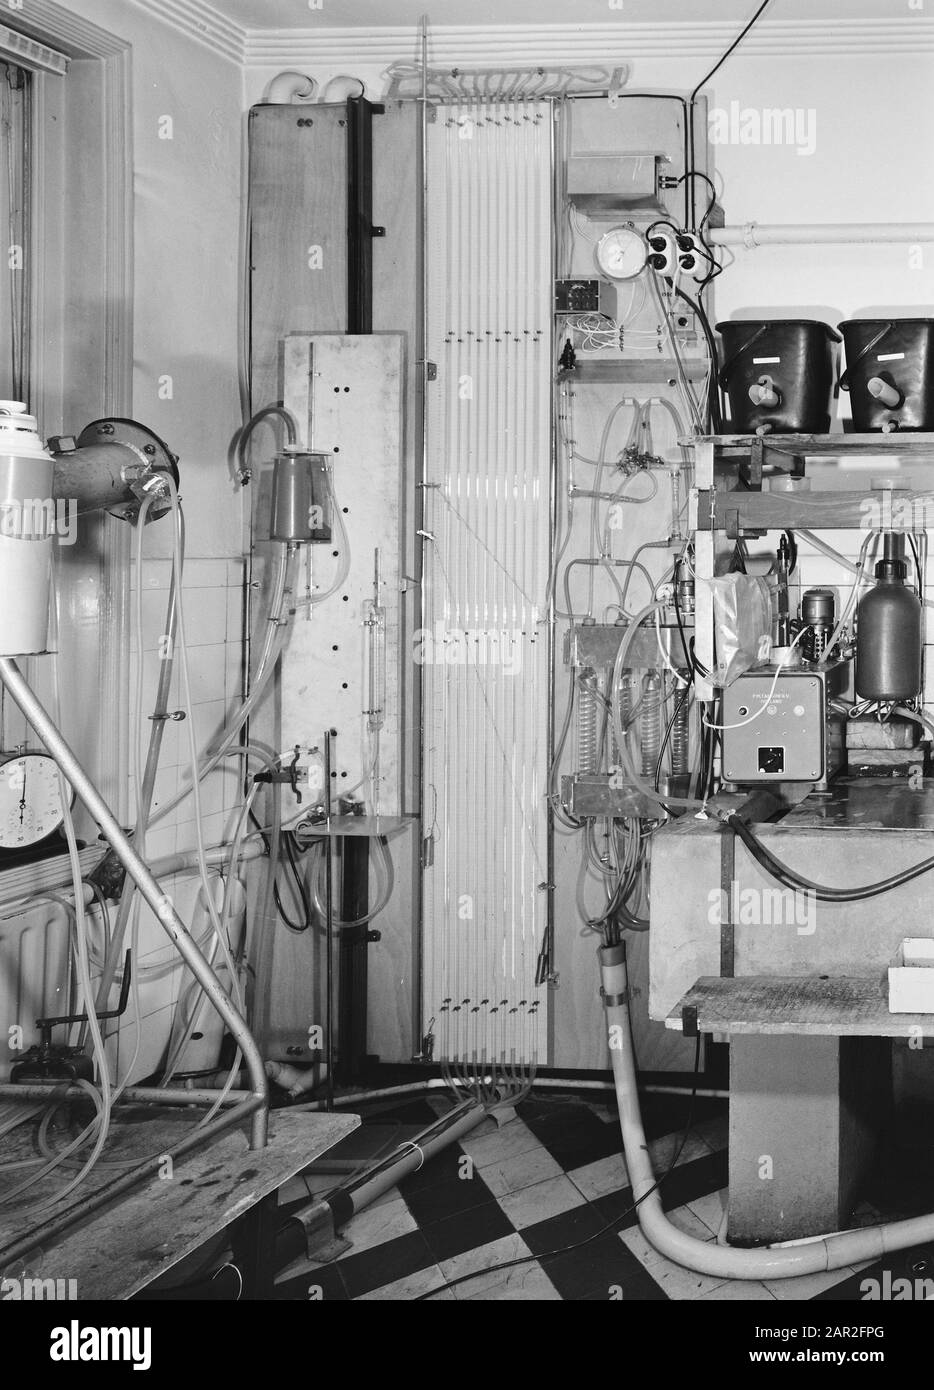 [Heideme] Laboratory  Test setup in Hydrological Laboratory of the Research Department Date: March 1967 Location: Arnhem Keywords: plates, pressure vessels, laboratory, miniralisators, overviews, panels, potential meters, water venting installations Stock Photo